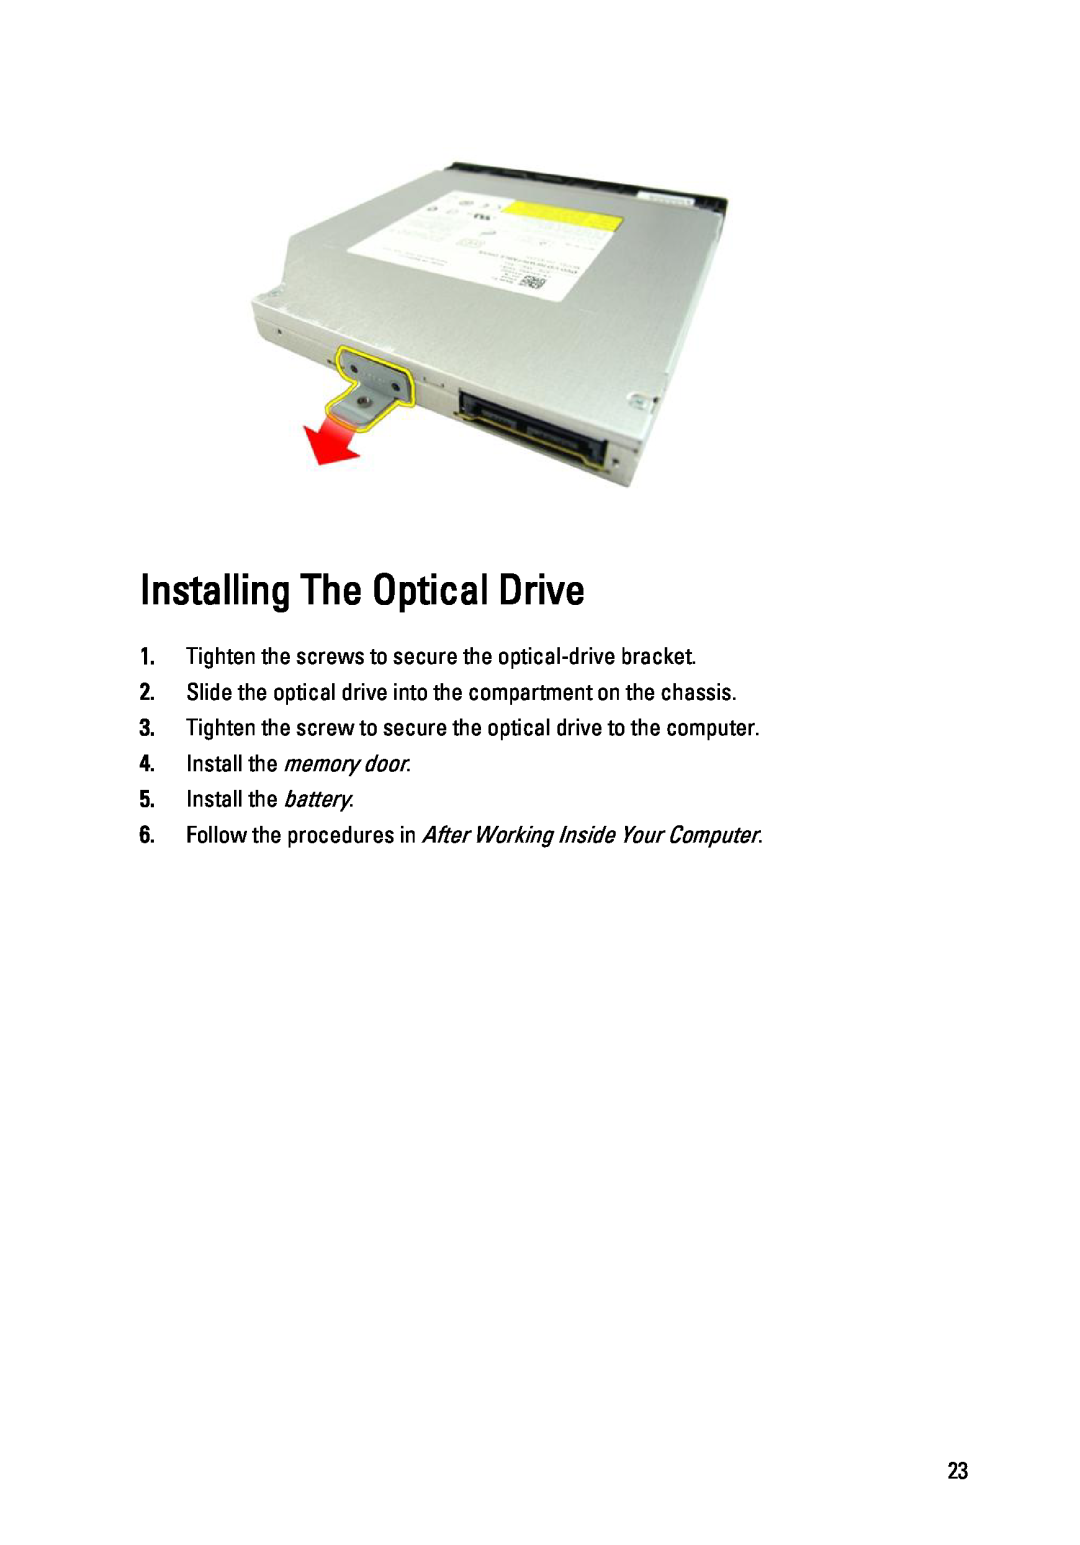 Dell 3450 owner manual Installing The Optical Drive, Tighten the screws to secure the optical-drive bracket 